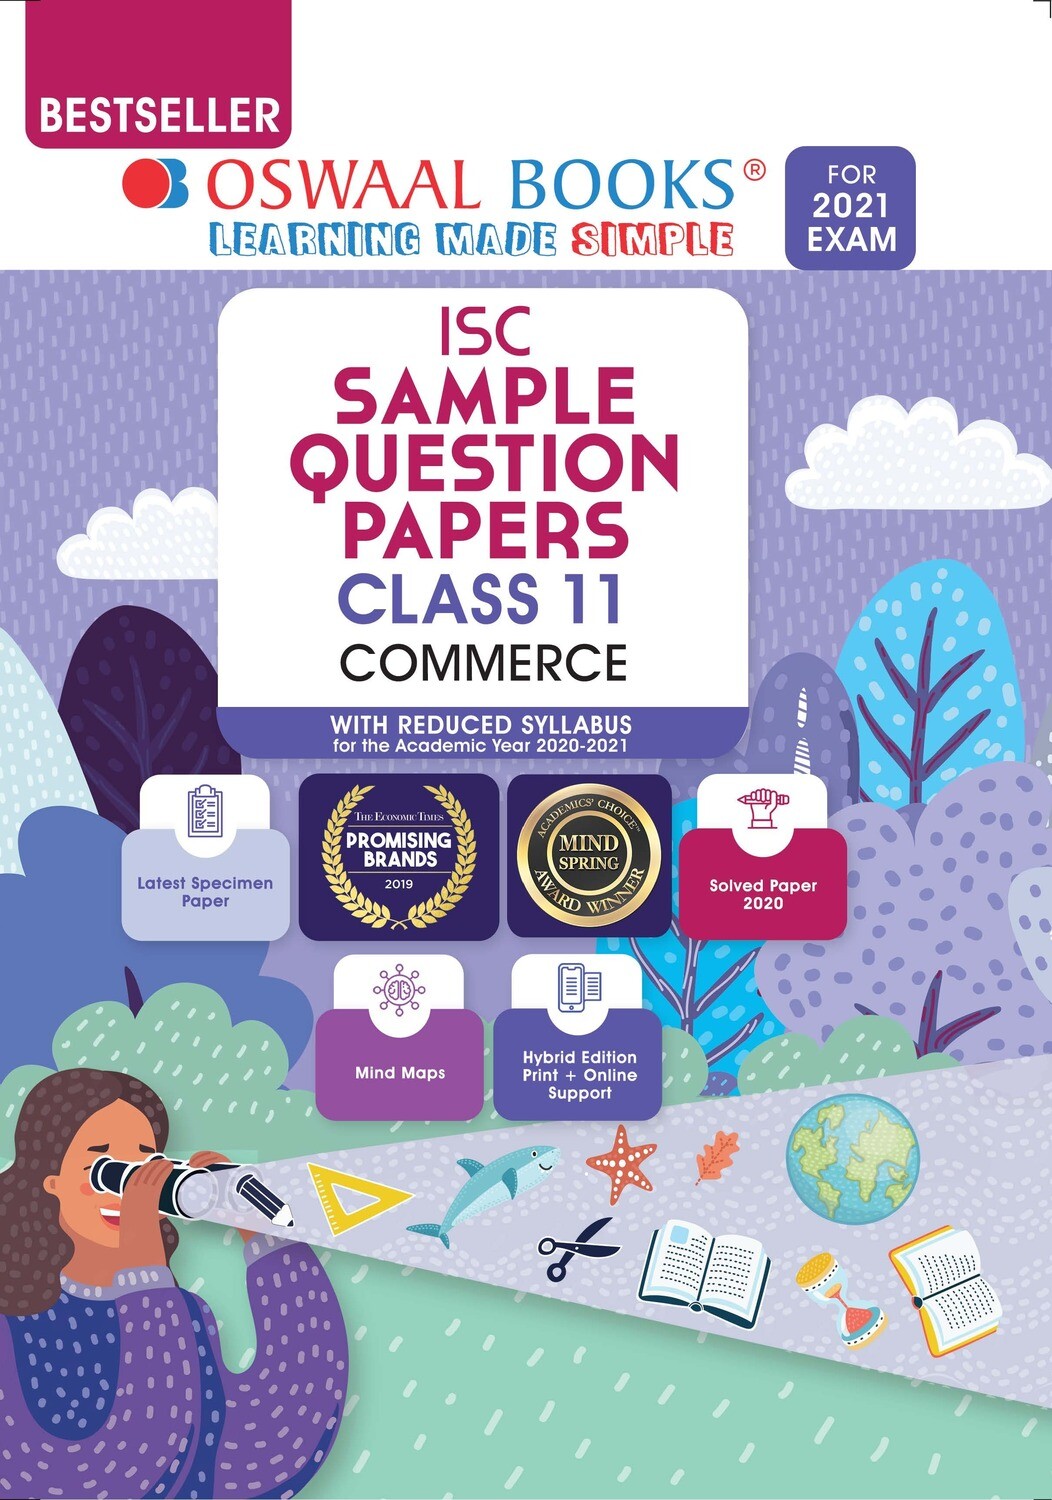 Buy e-book: Oswaal ISC Sample Question Paper Class 11 Commerce (For 2021 Exam)